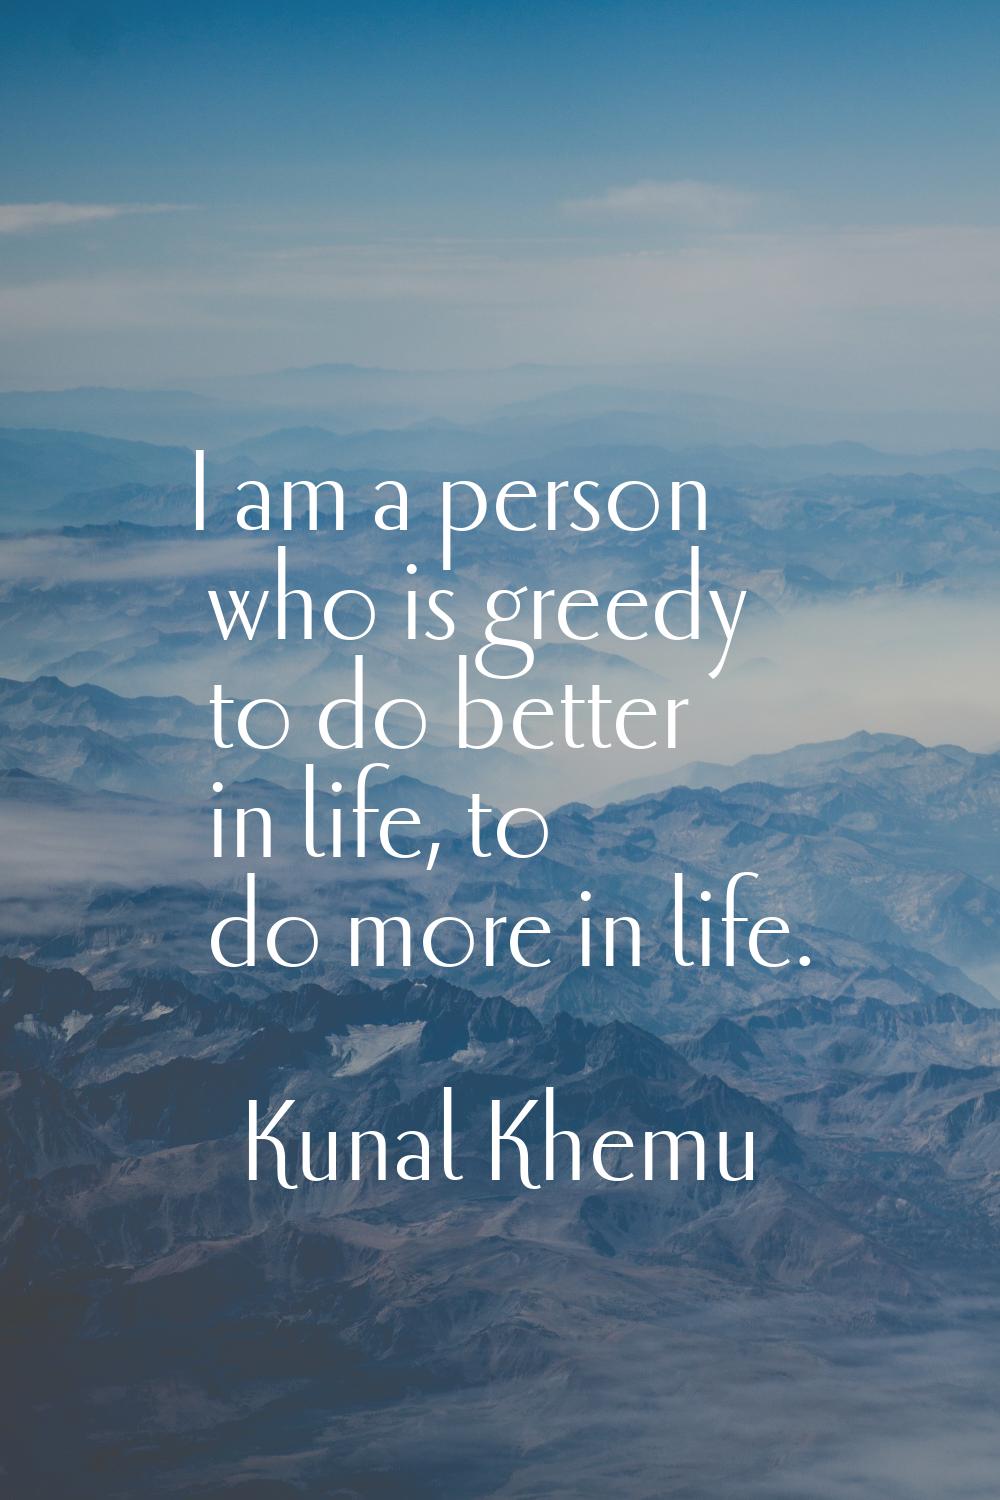 I am a person who is greedy to do better in life, to do more in life.